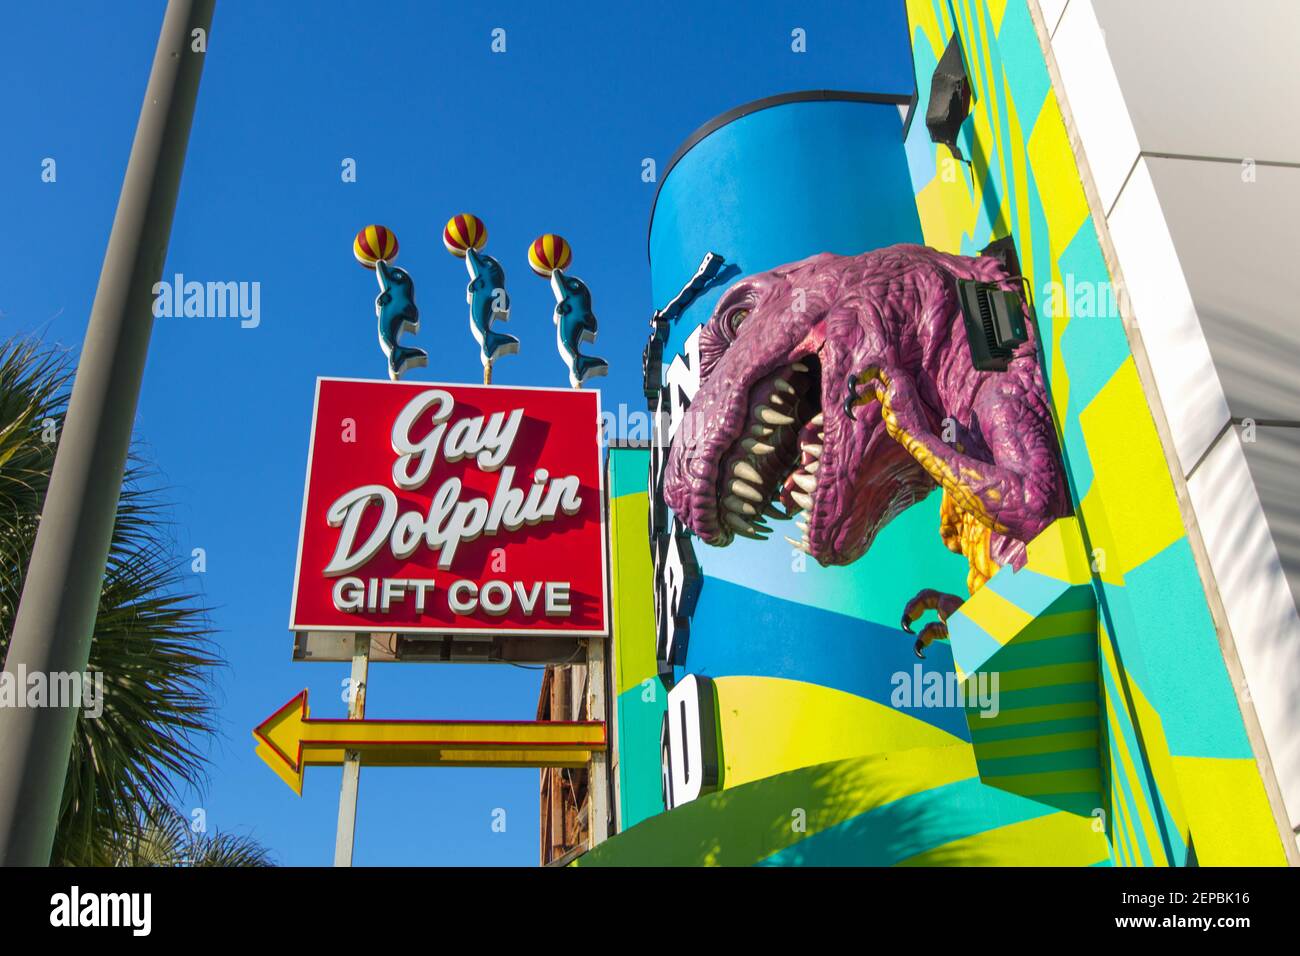 Myrtle Beach, South Carolina, USA - February 25, 2021: Signs for tourist attractions line the downtown boardwalk district of Myrtle Beach, SC. Stock Photo